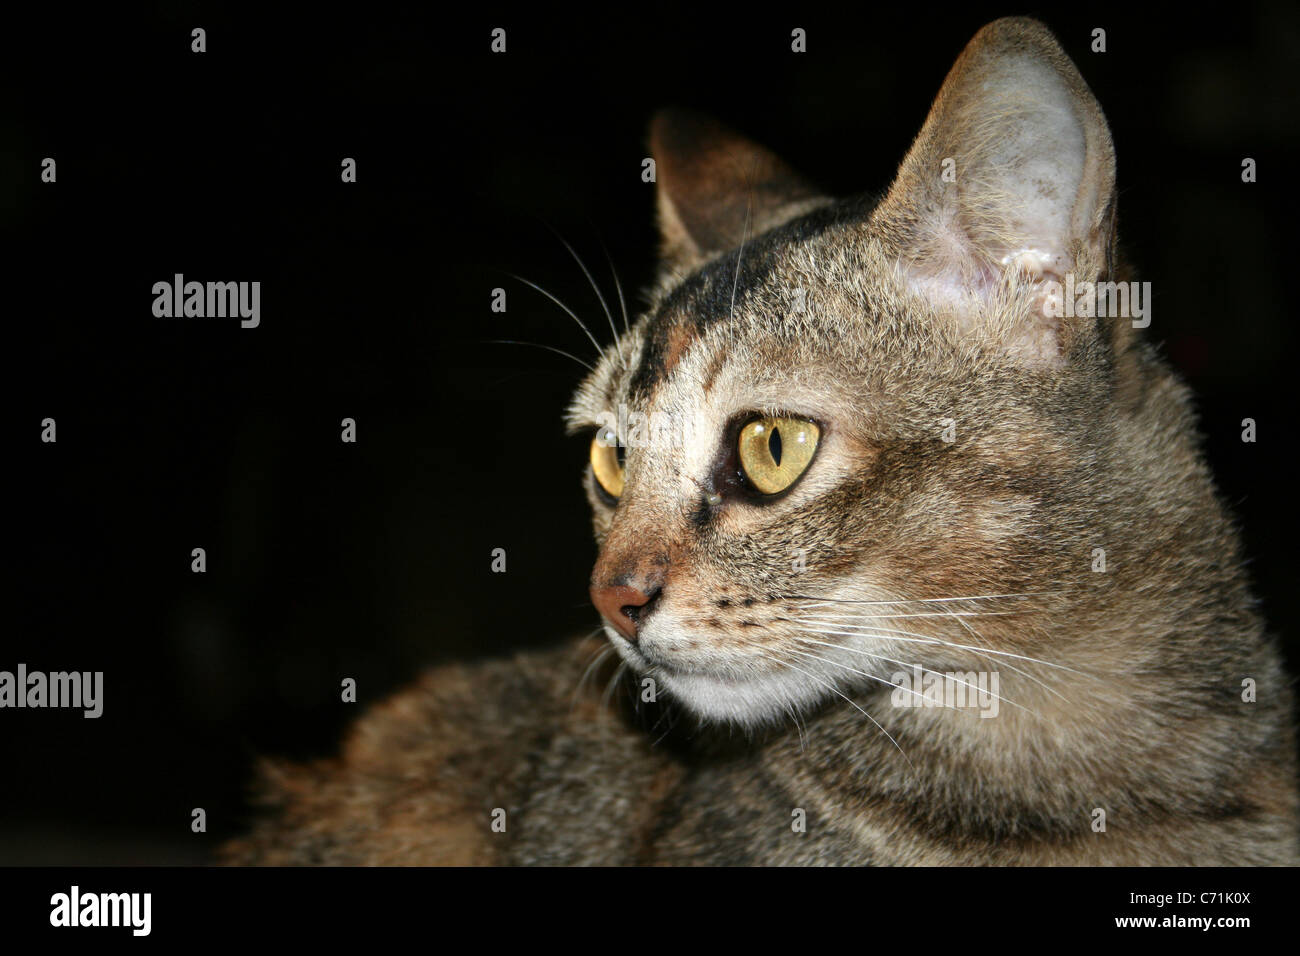 A Tabby Cat Taken in West Sumatra, Indonesia Stock Photo